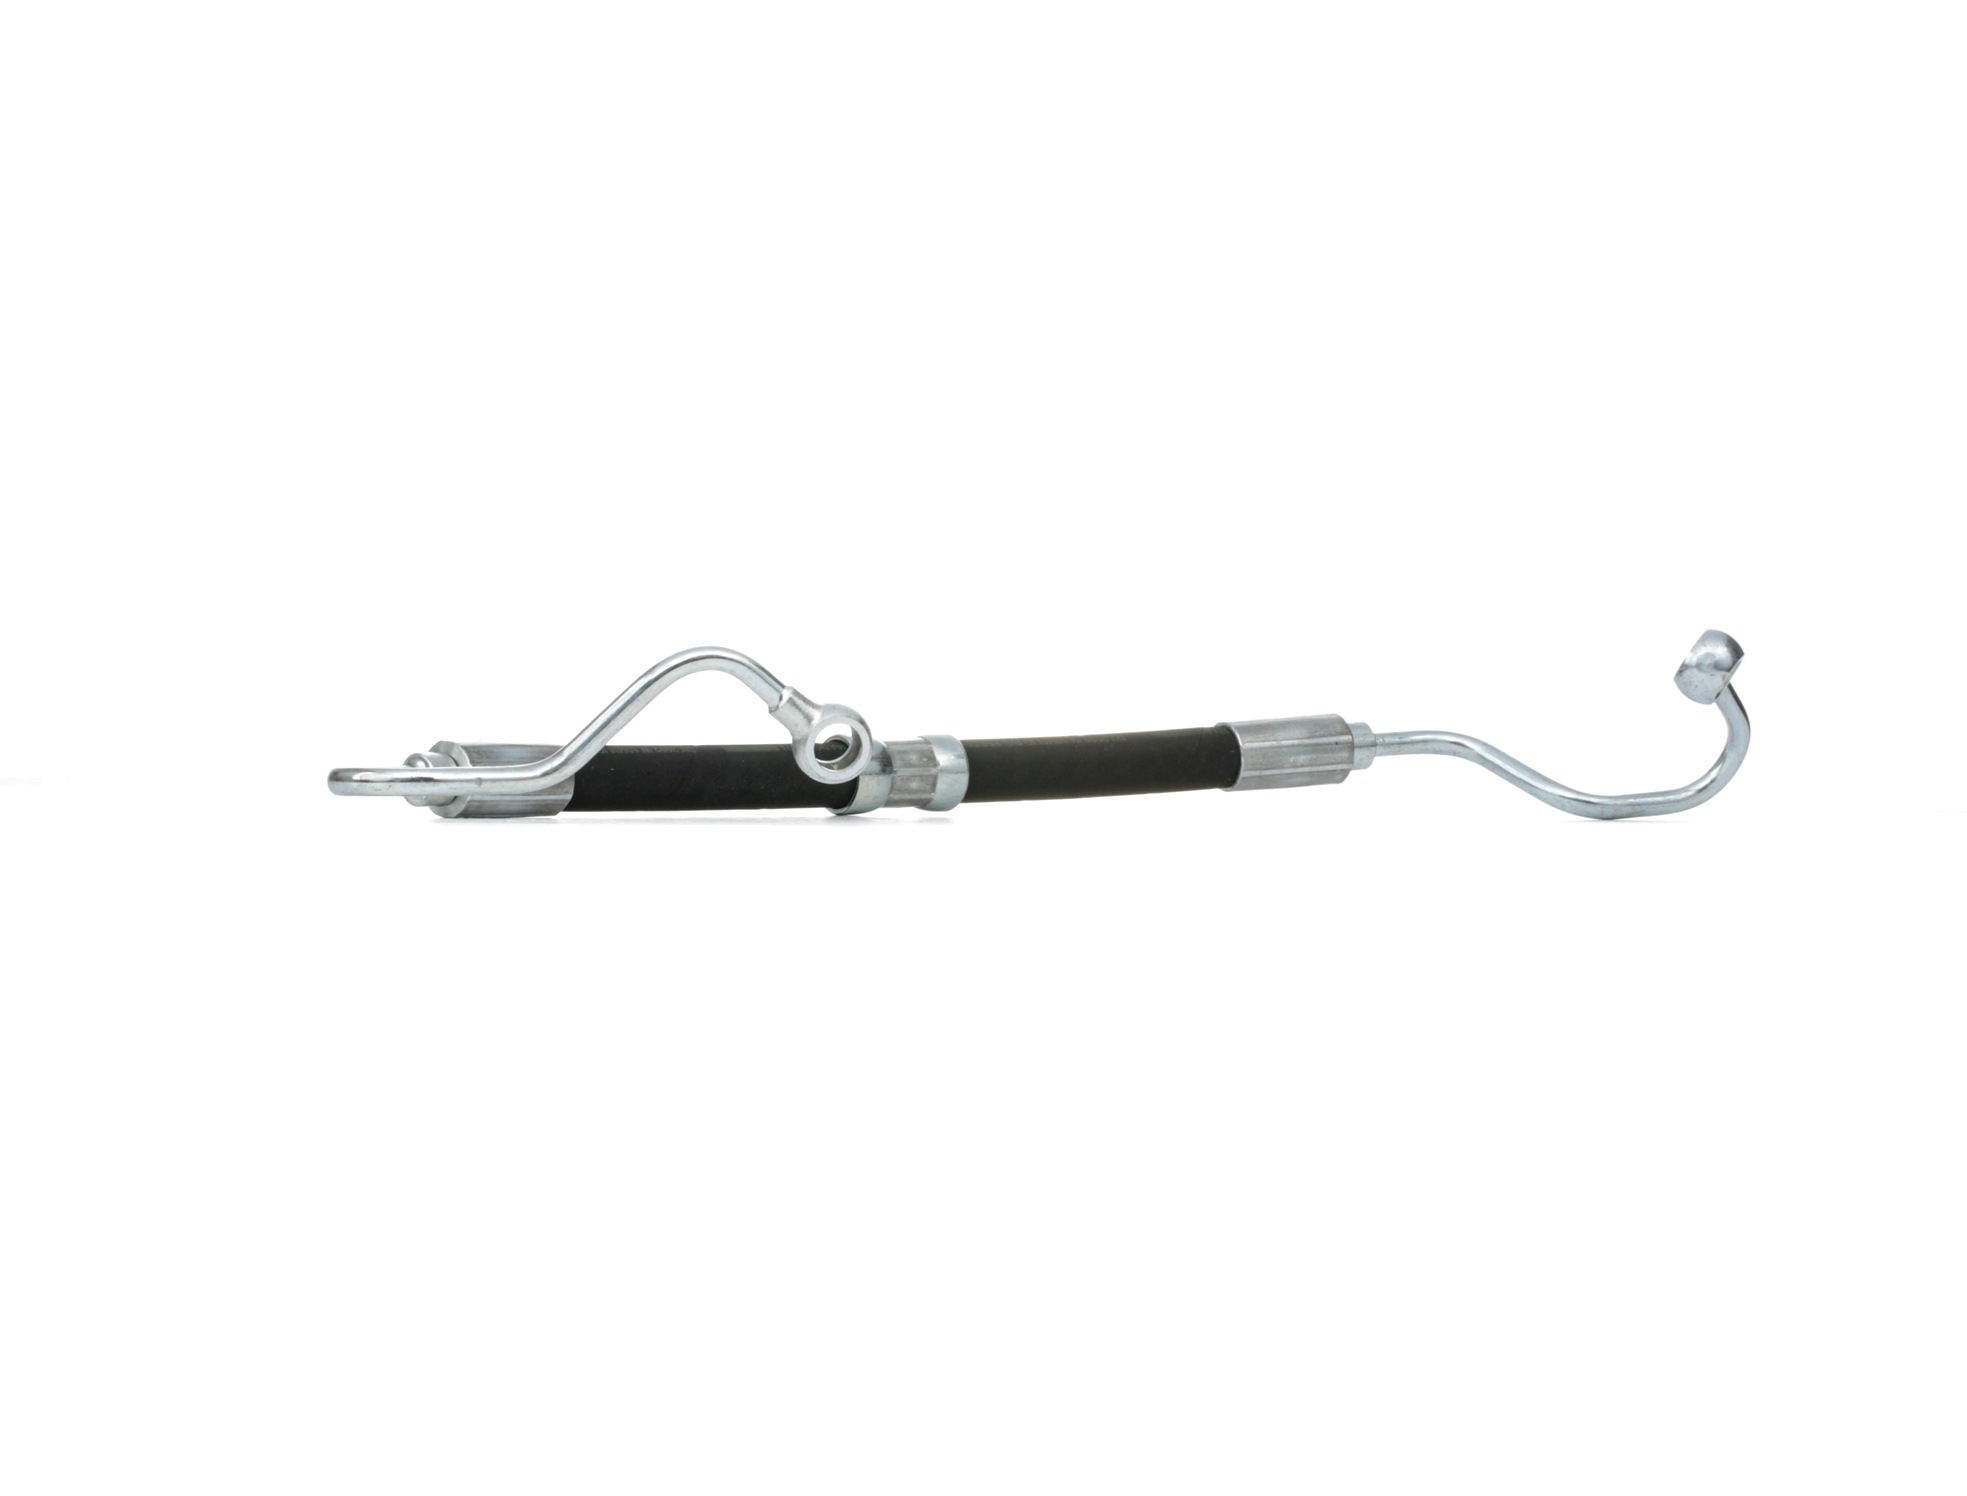 BMW Hydraulic Hose, steering system MEYLE 359 202 0019 at a good price